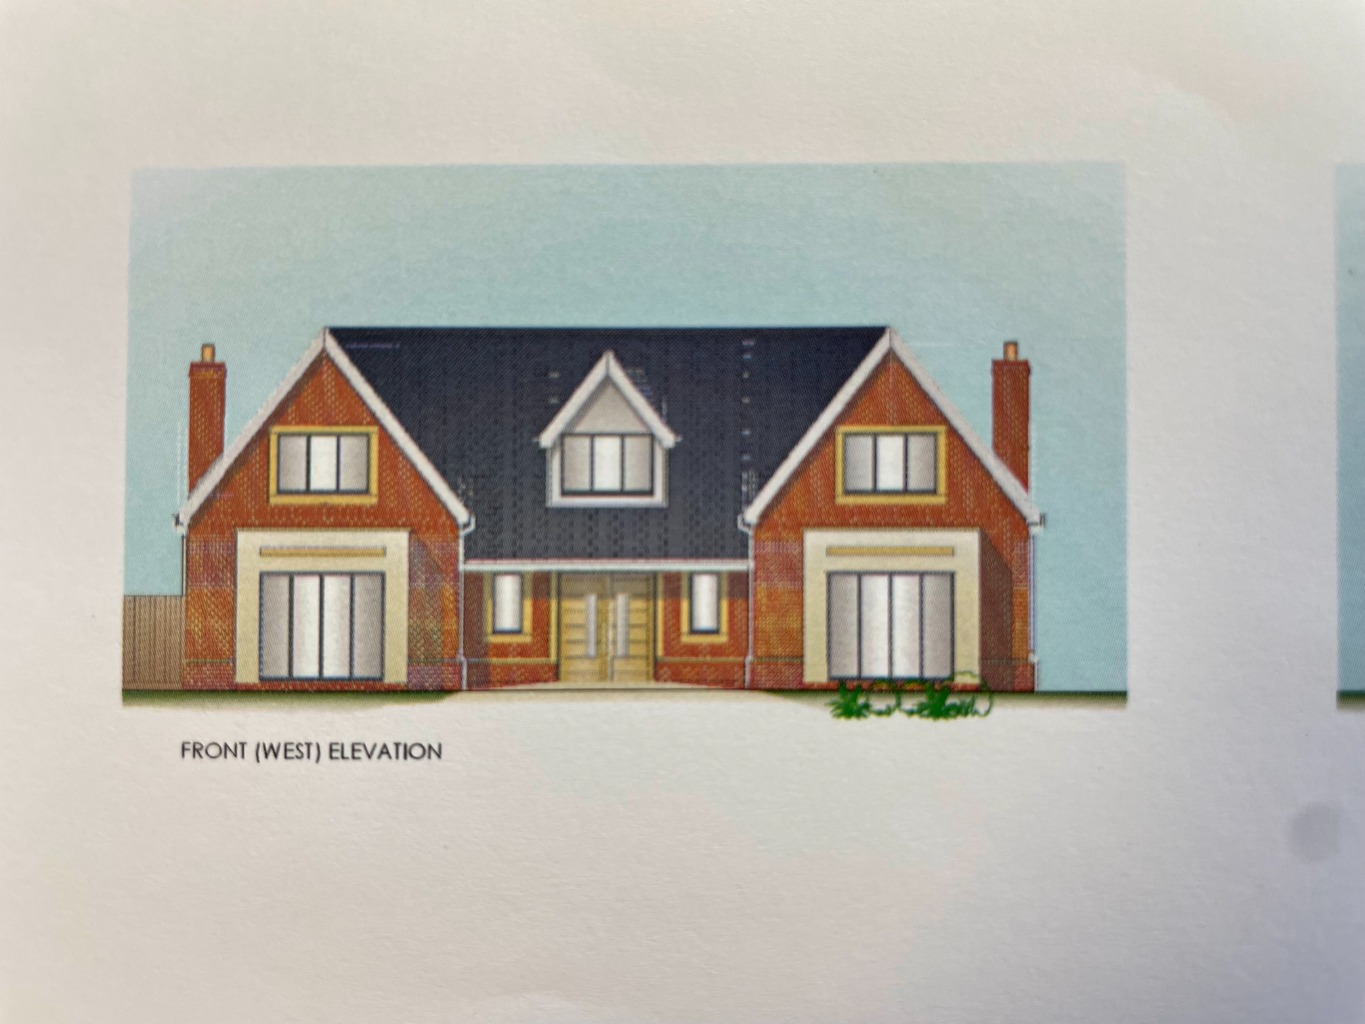 4 bed plot for sale in Potton Road, St. Neots, PE19